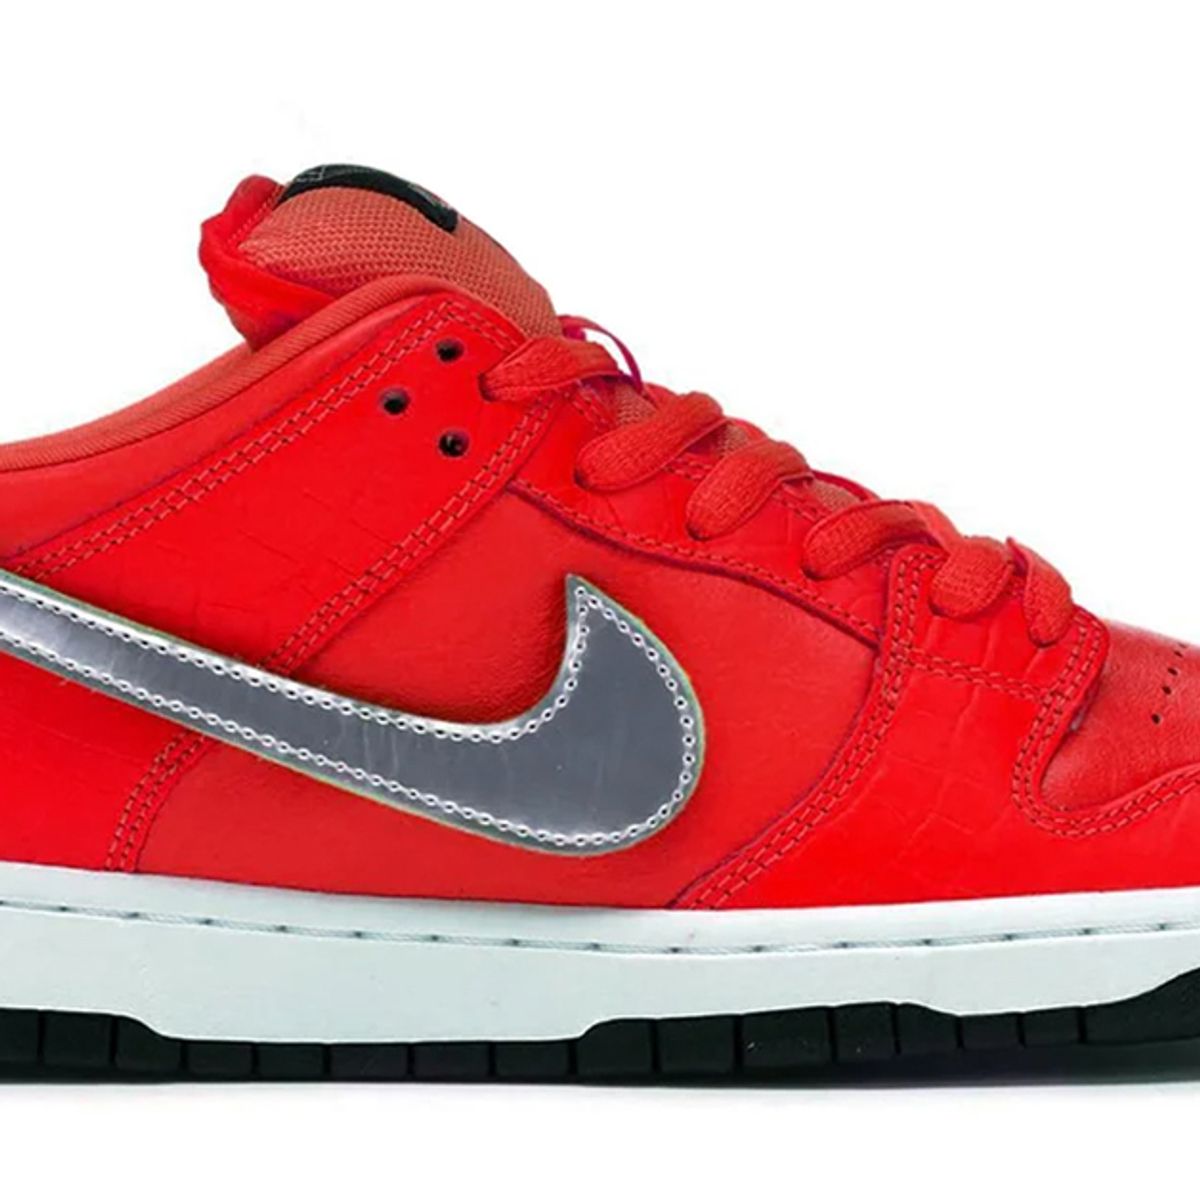 limpiador solapa continuar Rumoured: Diamond Supply Co. x Nike SB Dunk Low in Red! - Sneaker Freaker